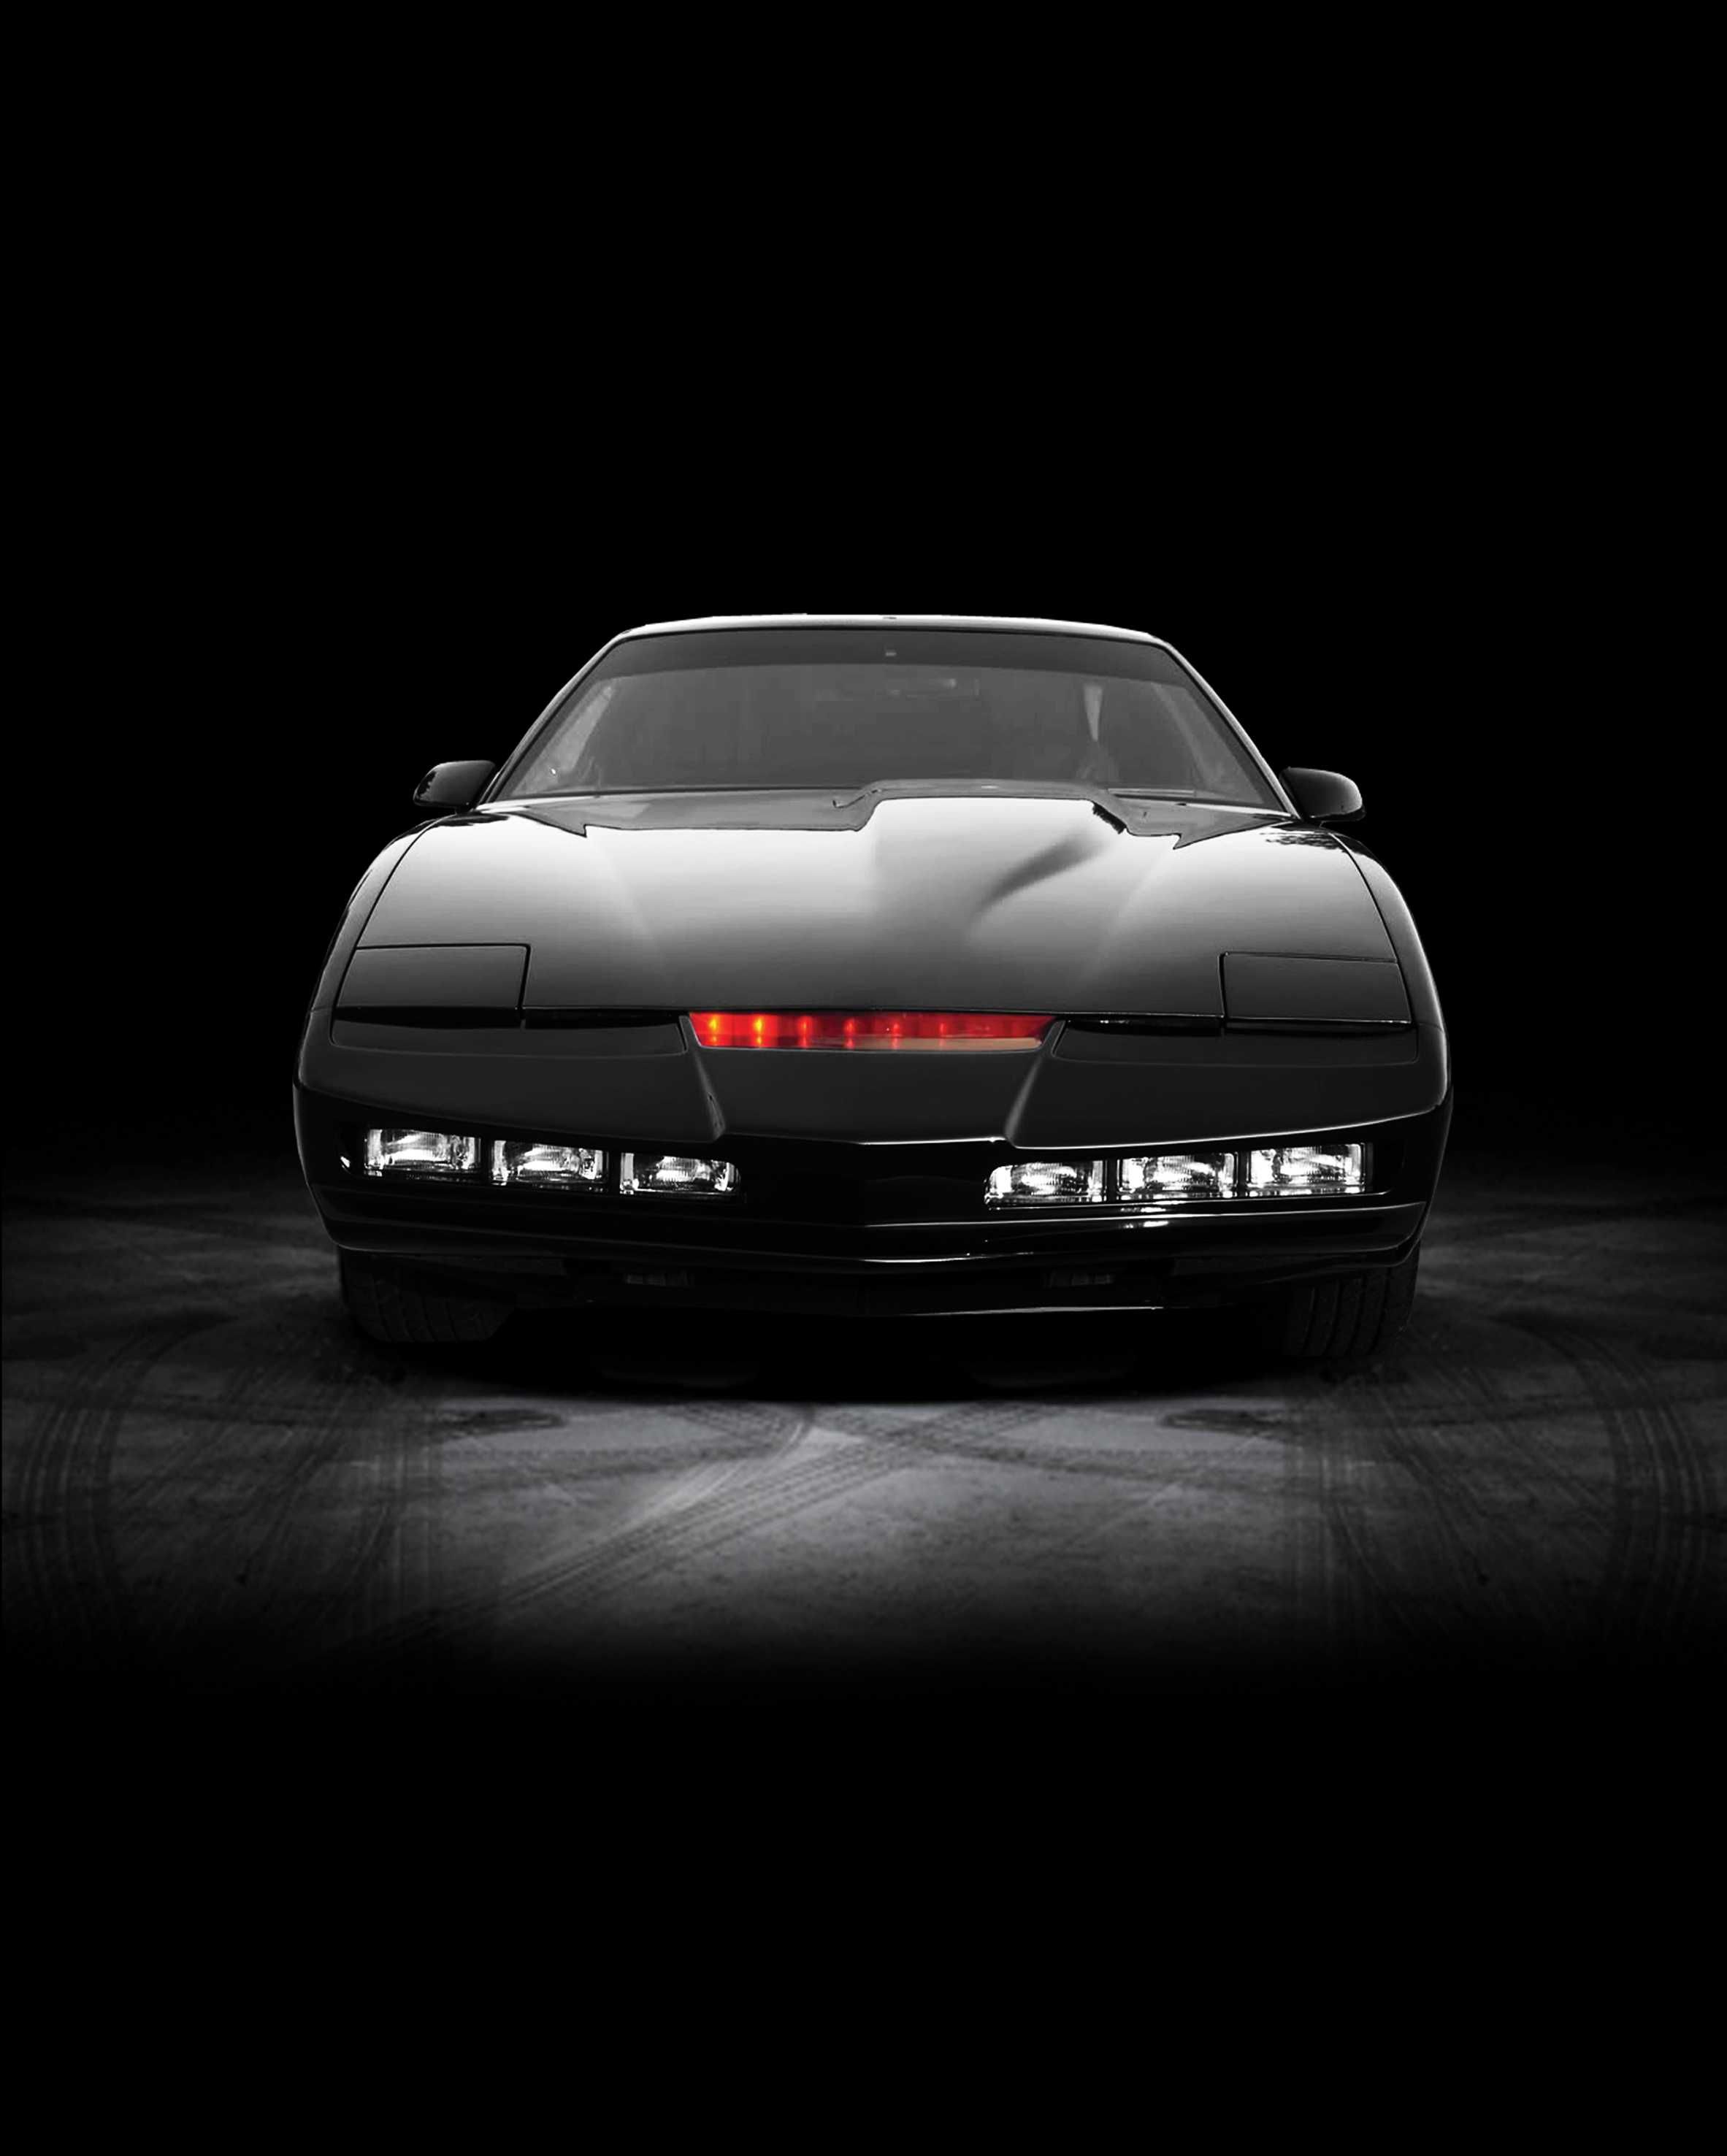 pictures of kitt from knight rider